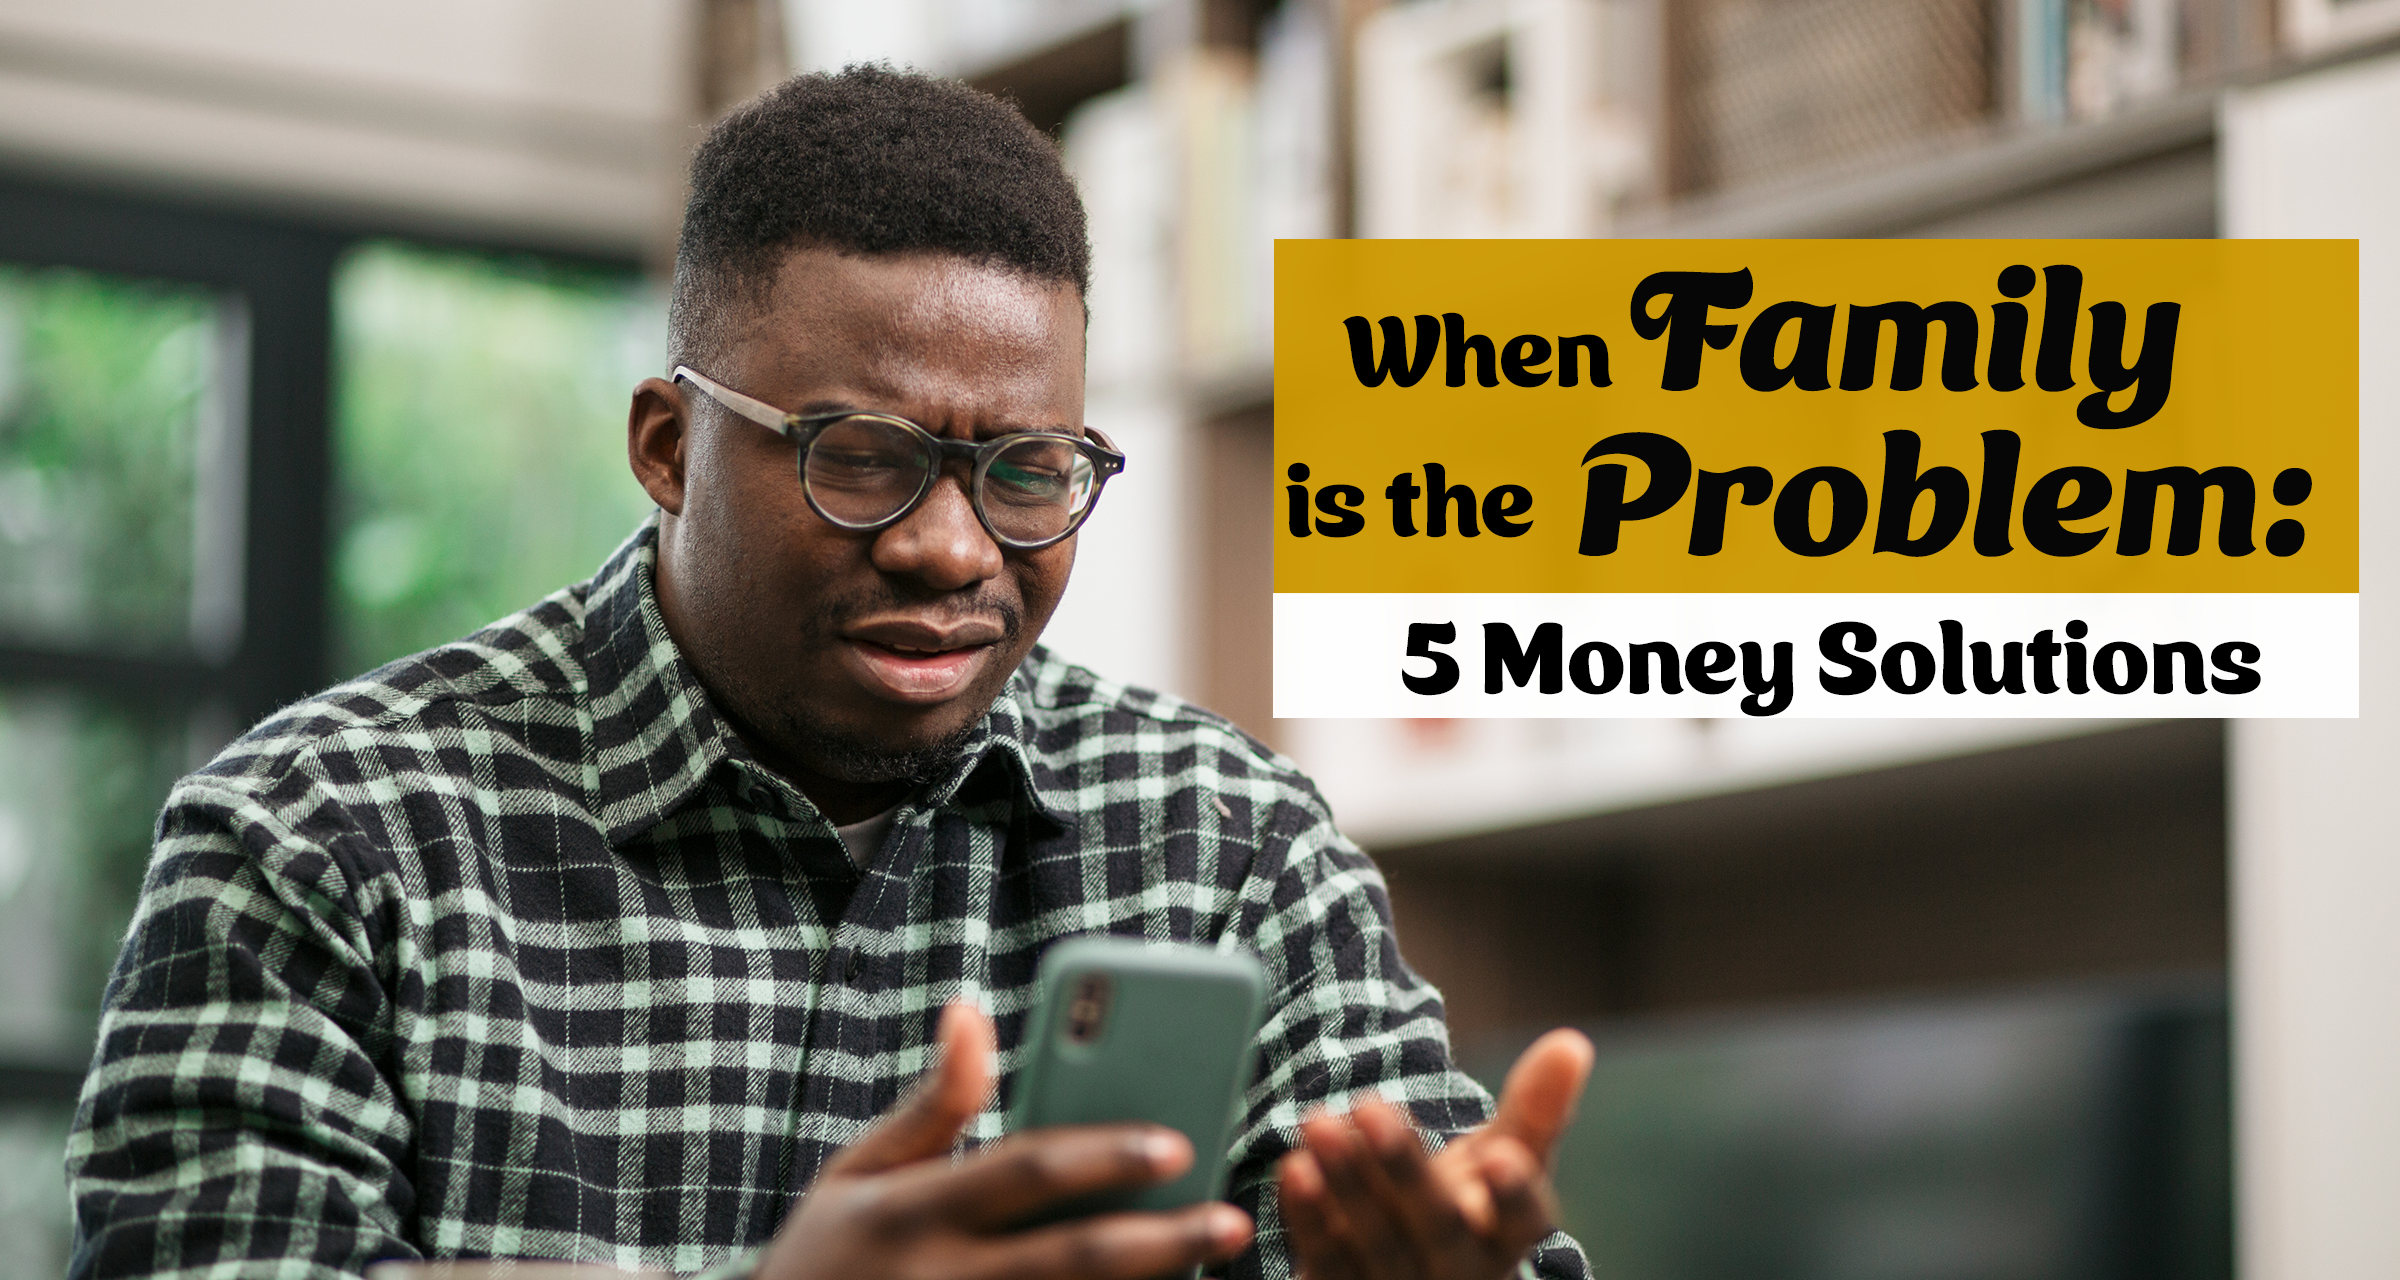 When Family is the Problem: 5 Money Solutions